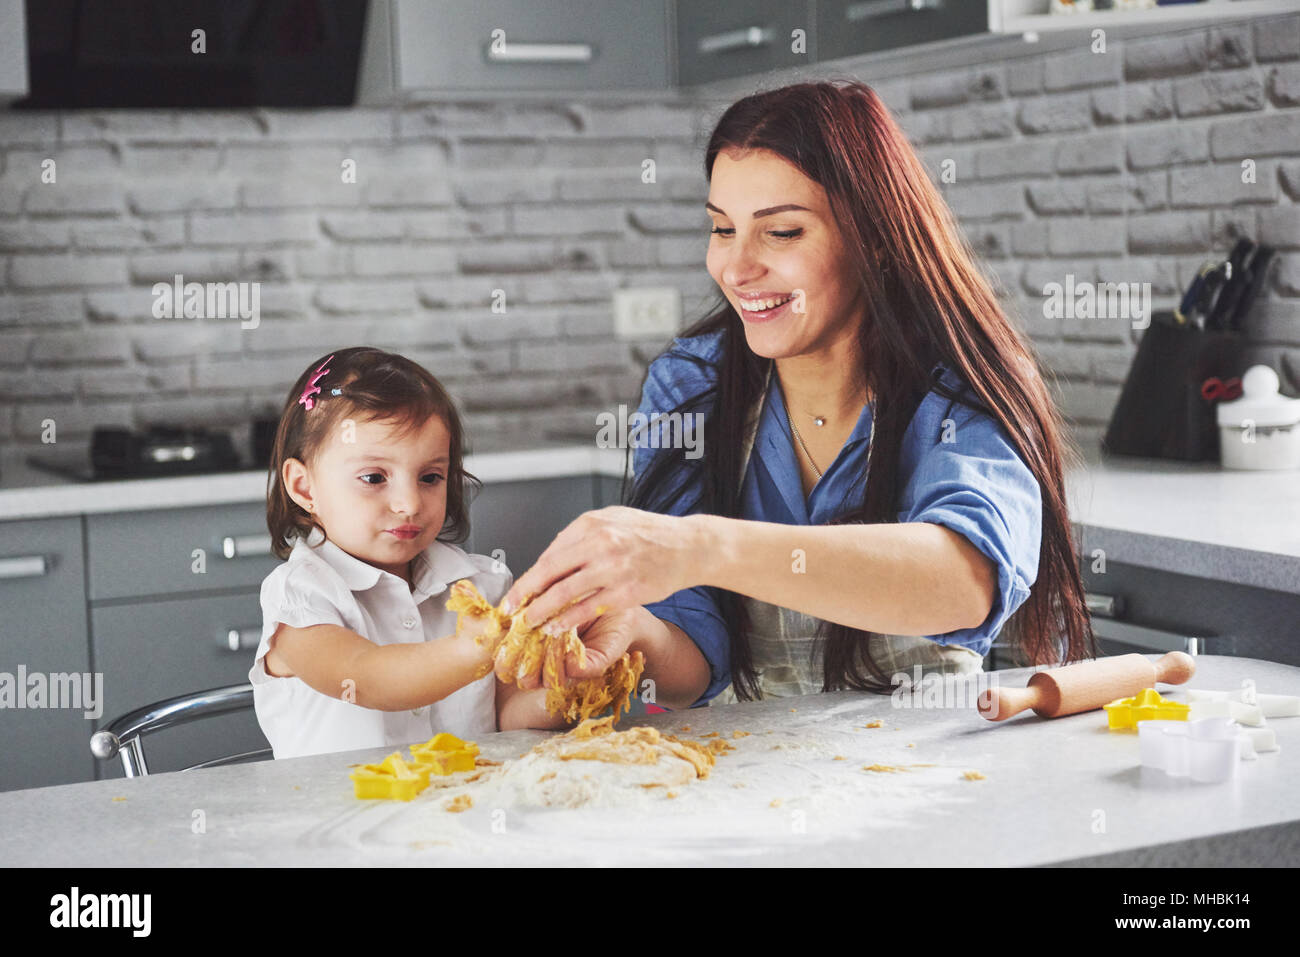 https://c8.alamy.com/comp/MHBK14/happy-family-in-the-kitchen-holiday-food-concept-mother-and-daughter-preparing-the-dough-bake-cookies-happy-family-in-making-cookies-at-home-homemade-food-and-little-helper-MHBK14.jpg